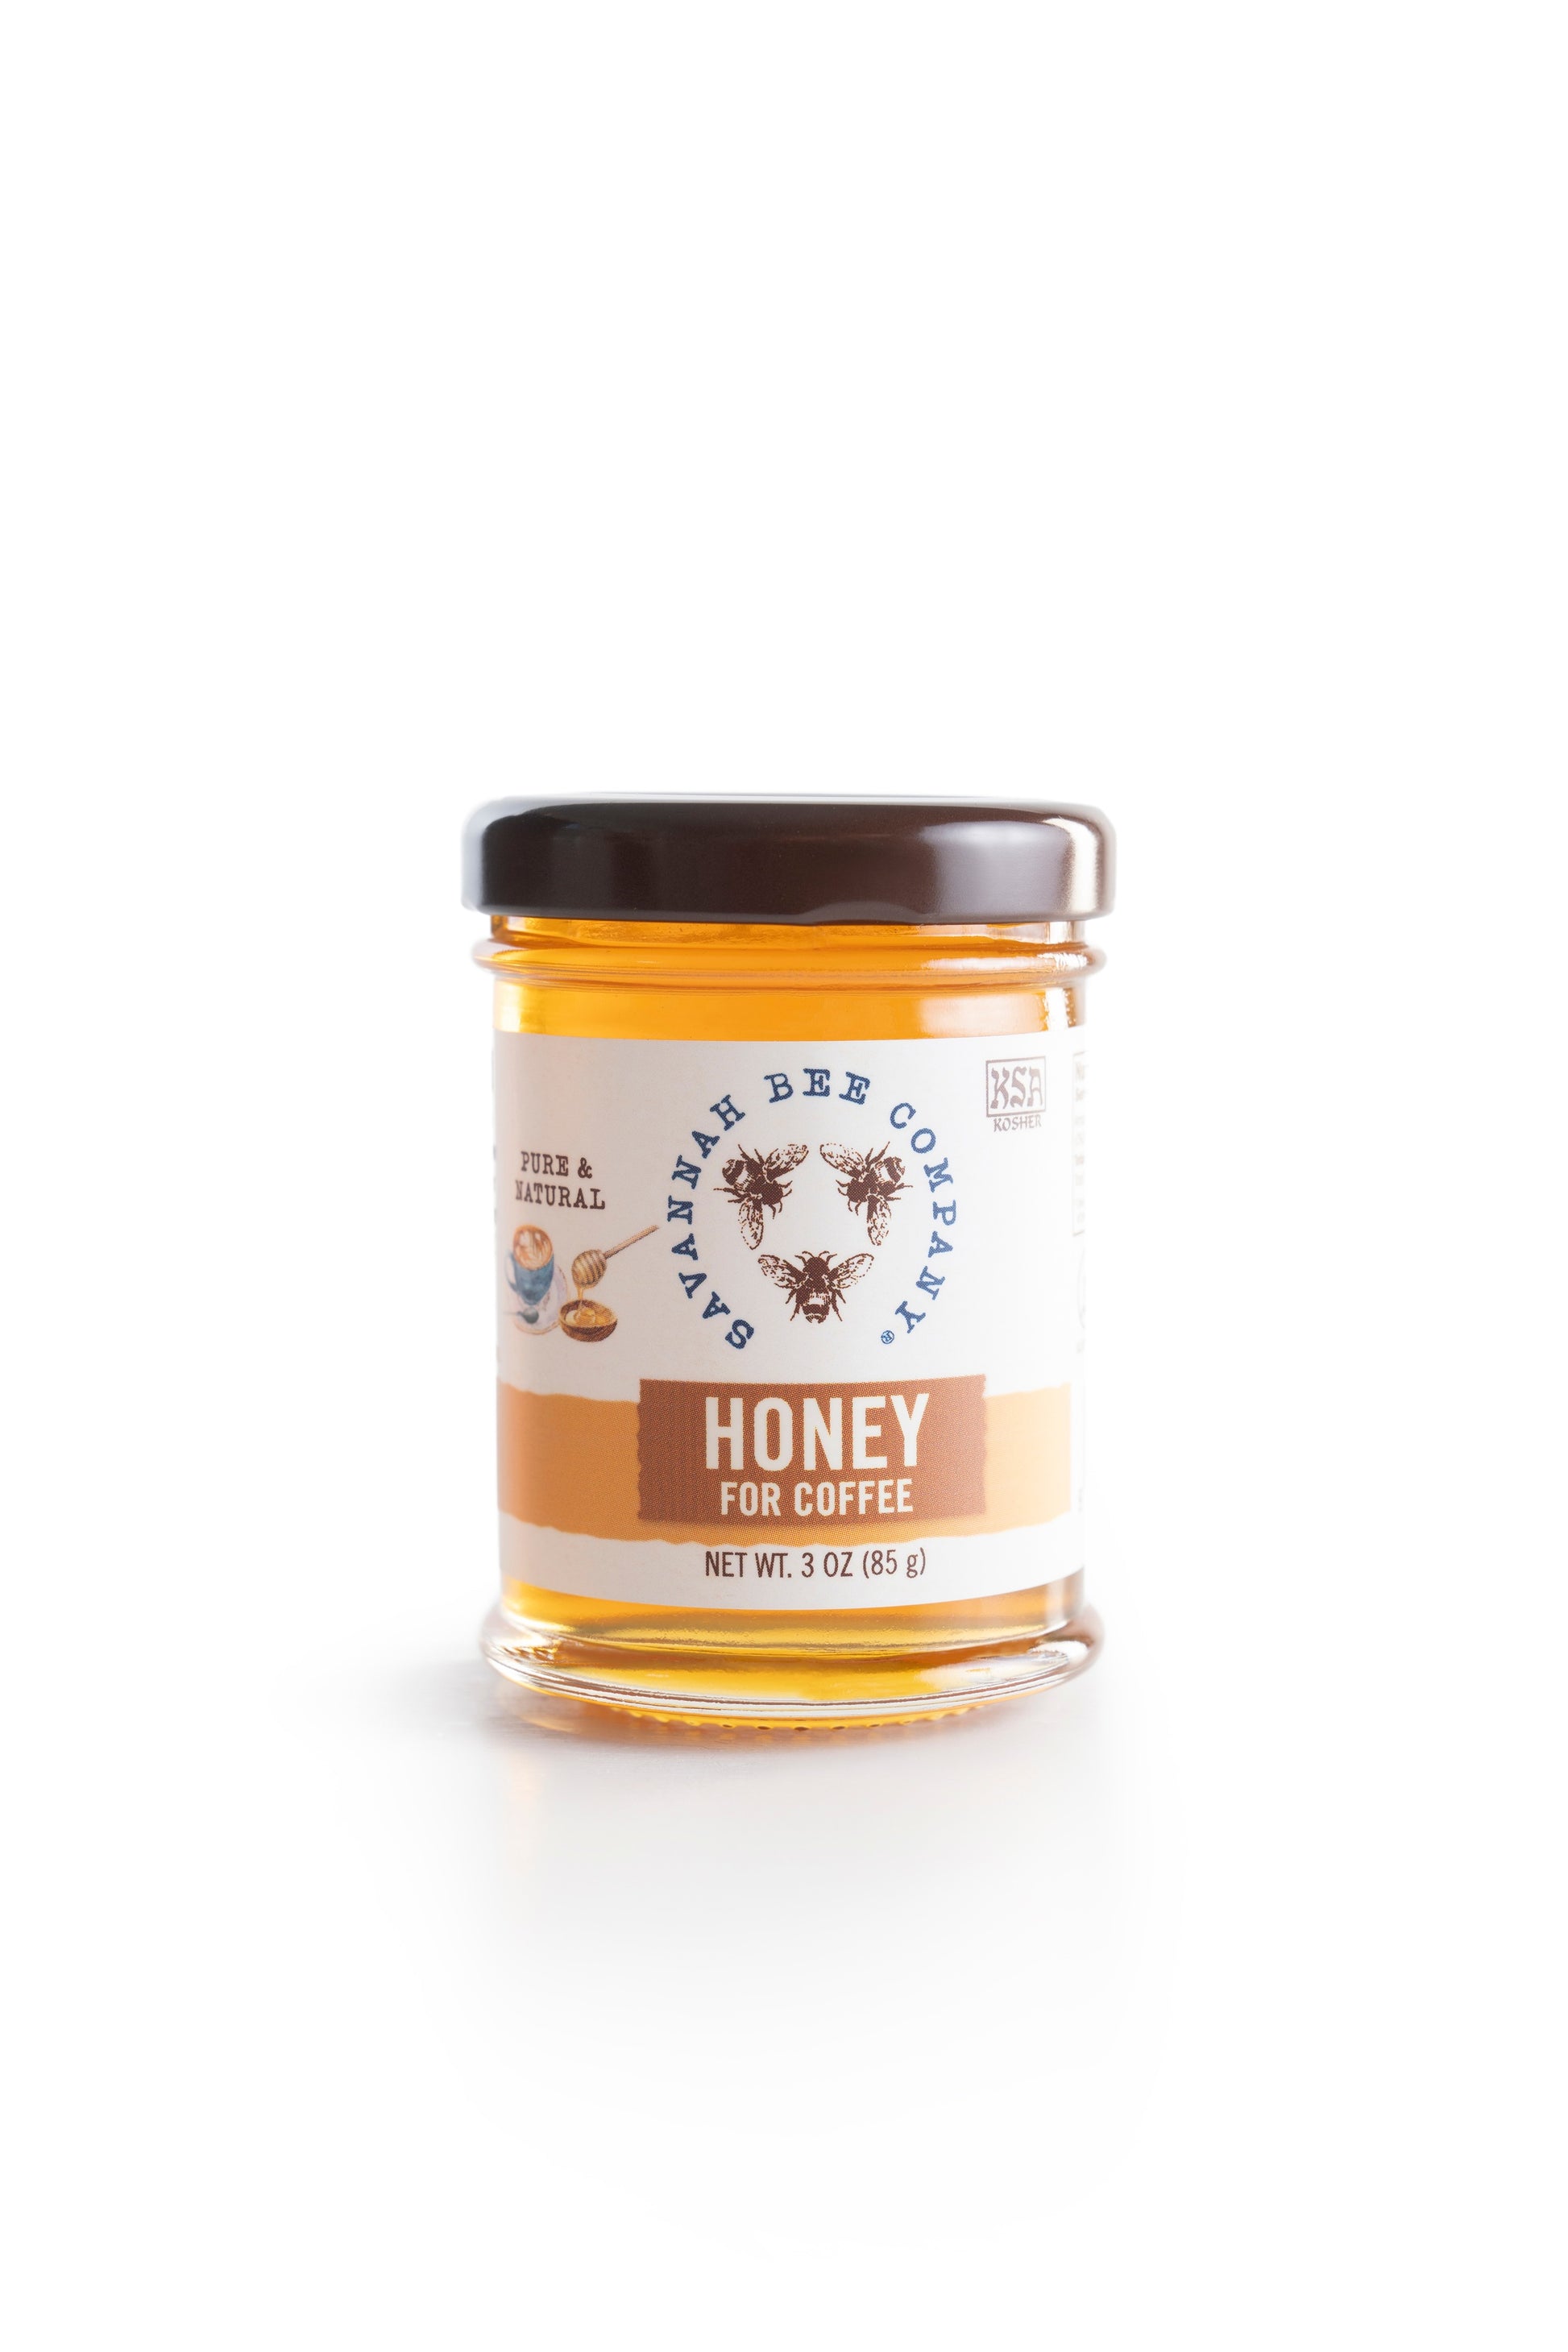 3 ounce Honey for coffee in a glass jar front view on a white background